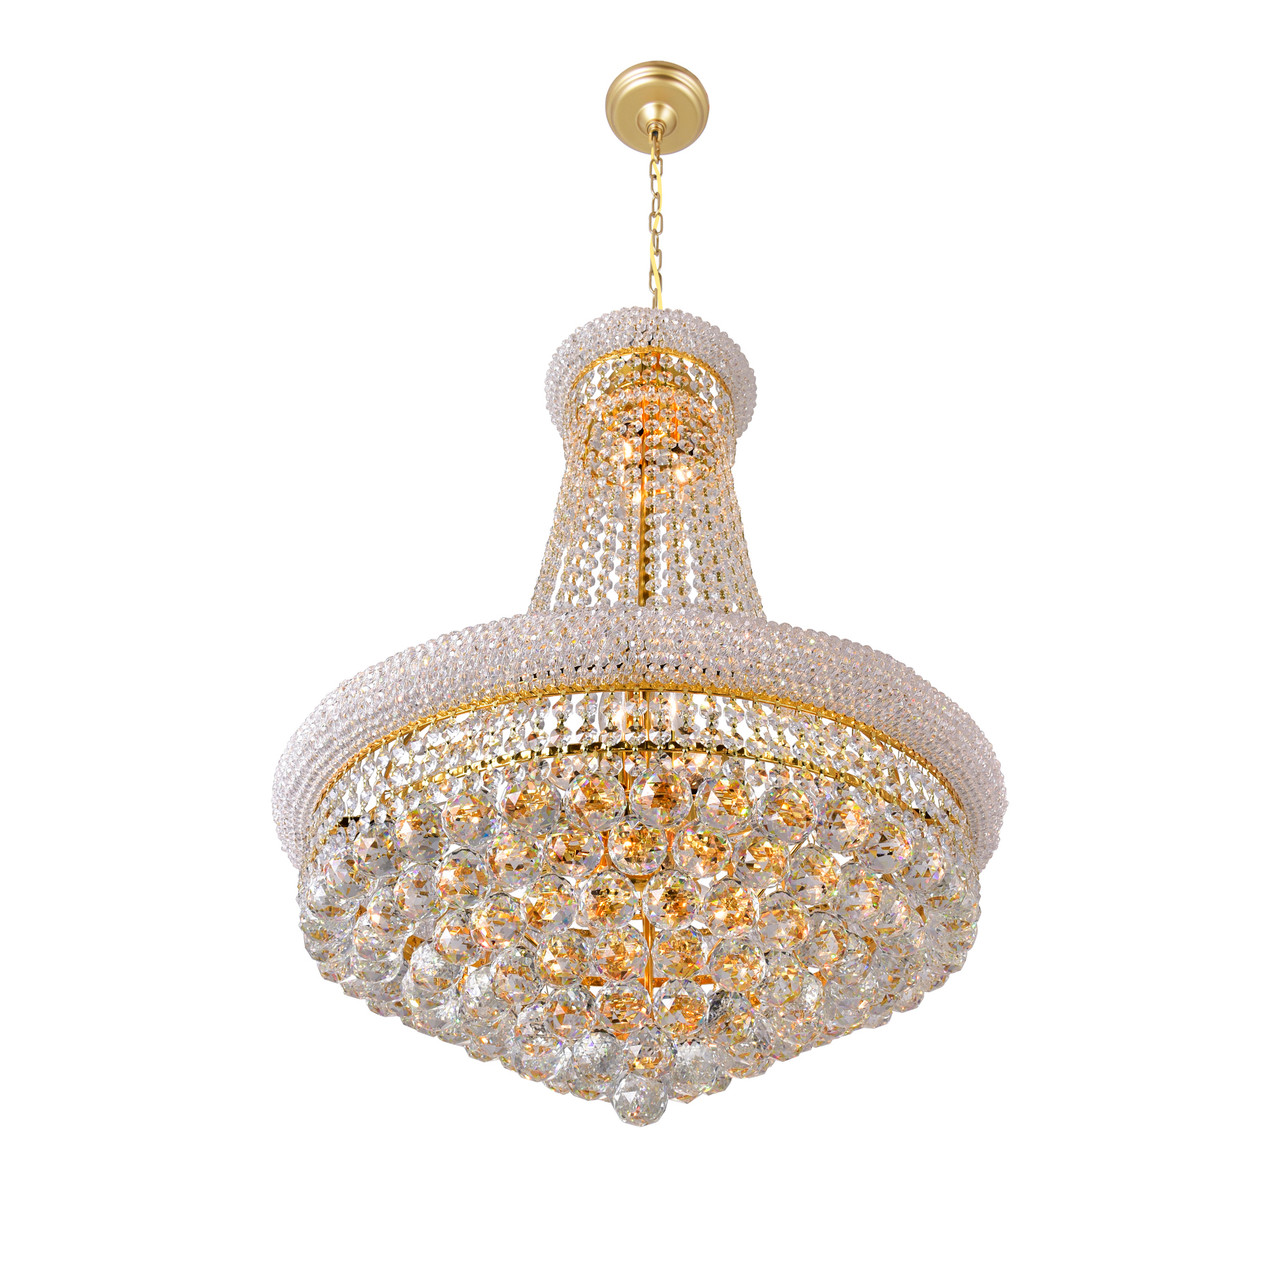 CWI LIGHTING 8001P24G 17 Light Down Chandelier with Gold finish